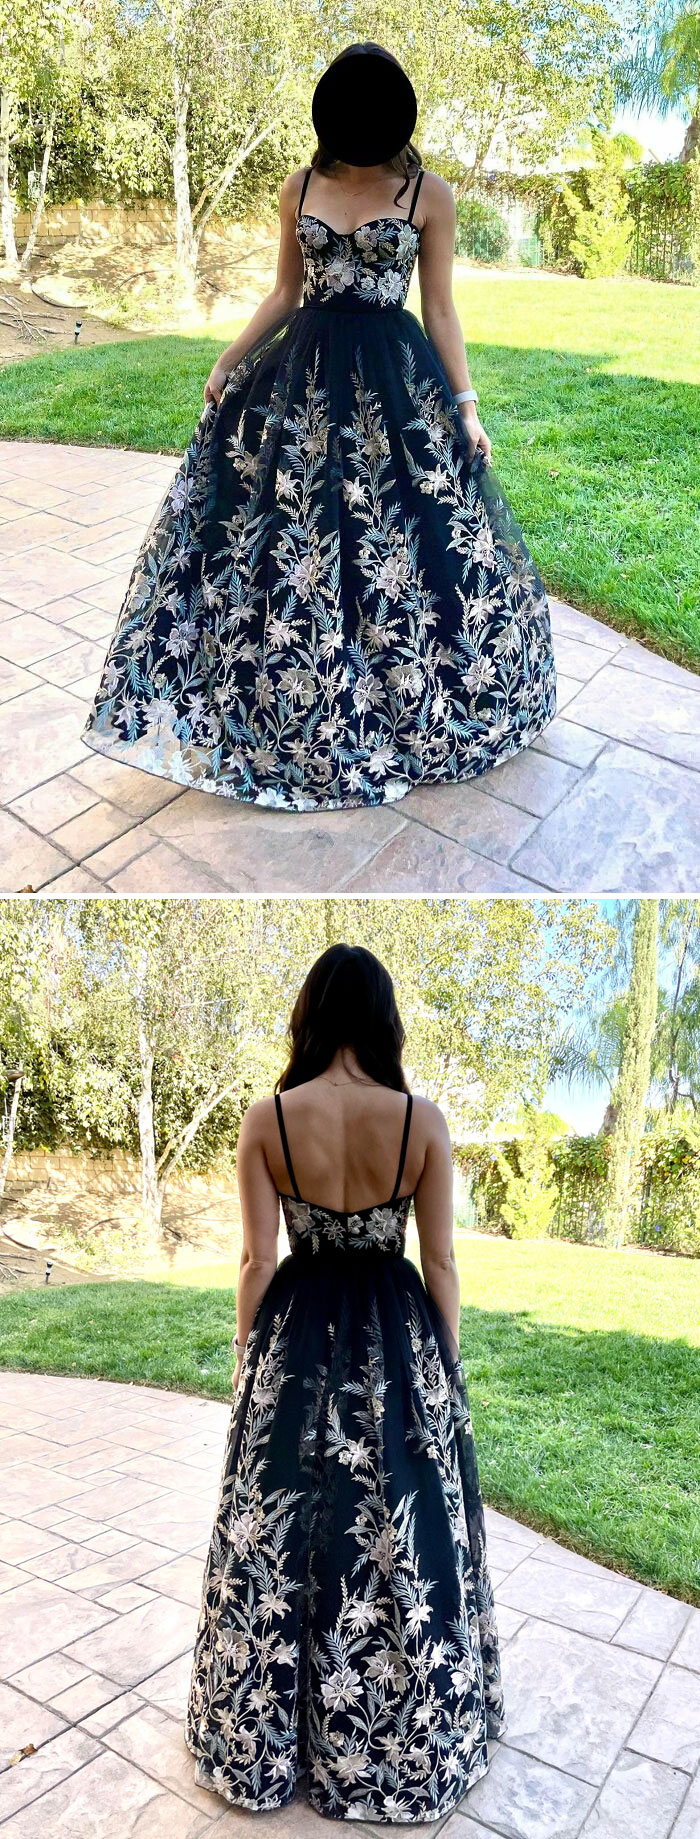 Finally Finished - Formal Dress For A Wedding I’m Attending